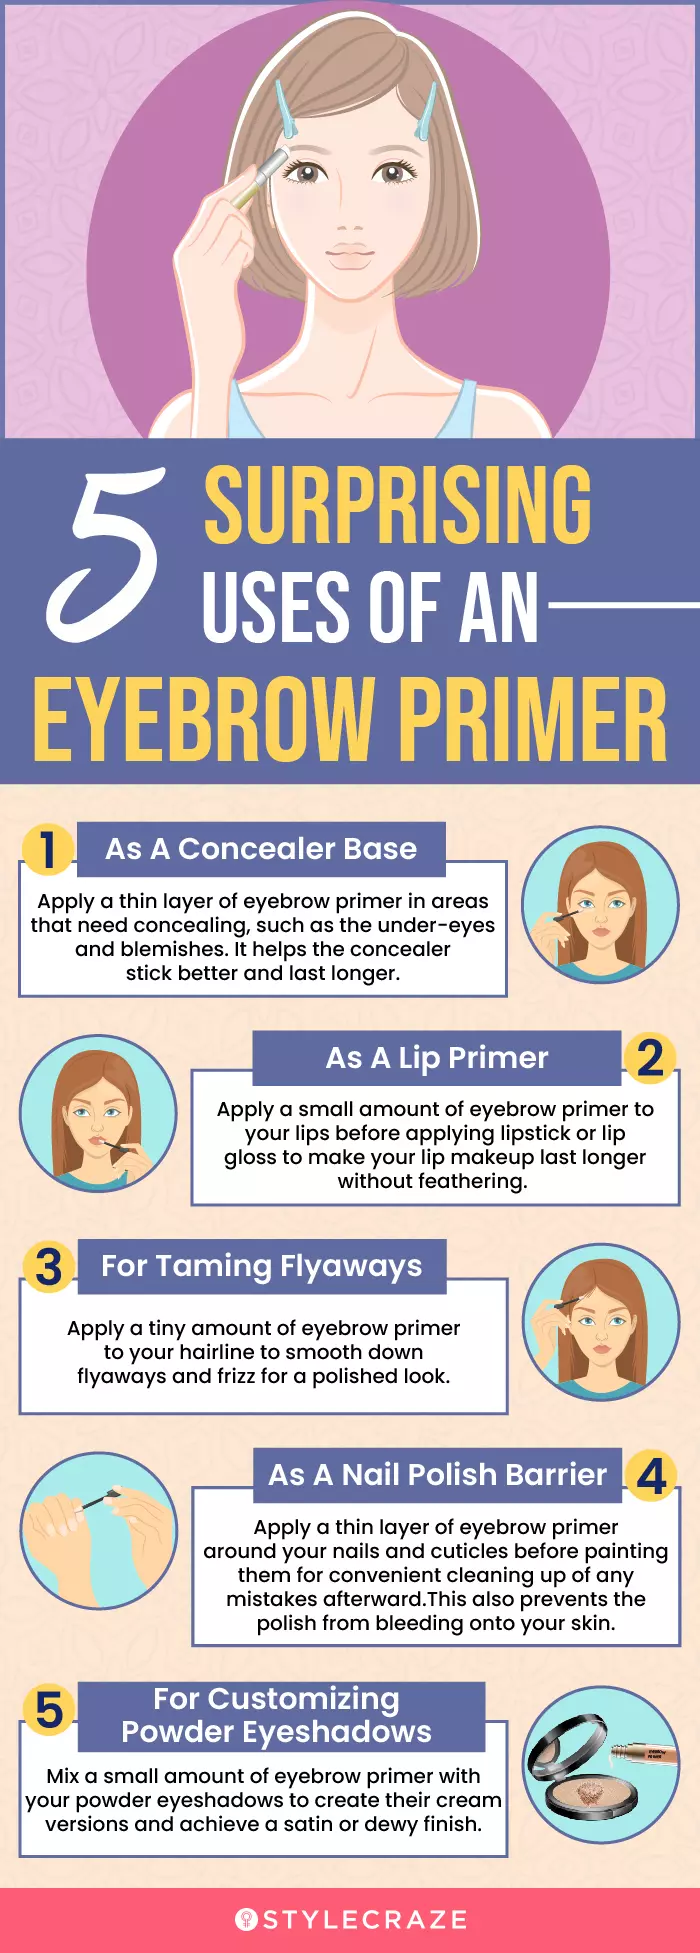 5 Surprising Uses Of An Eyebrow Primer (infographic)